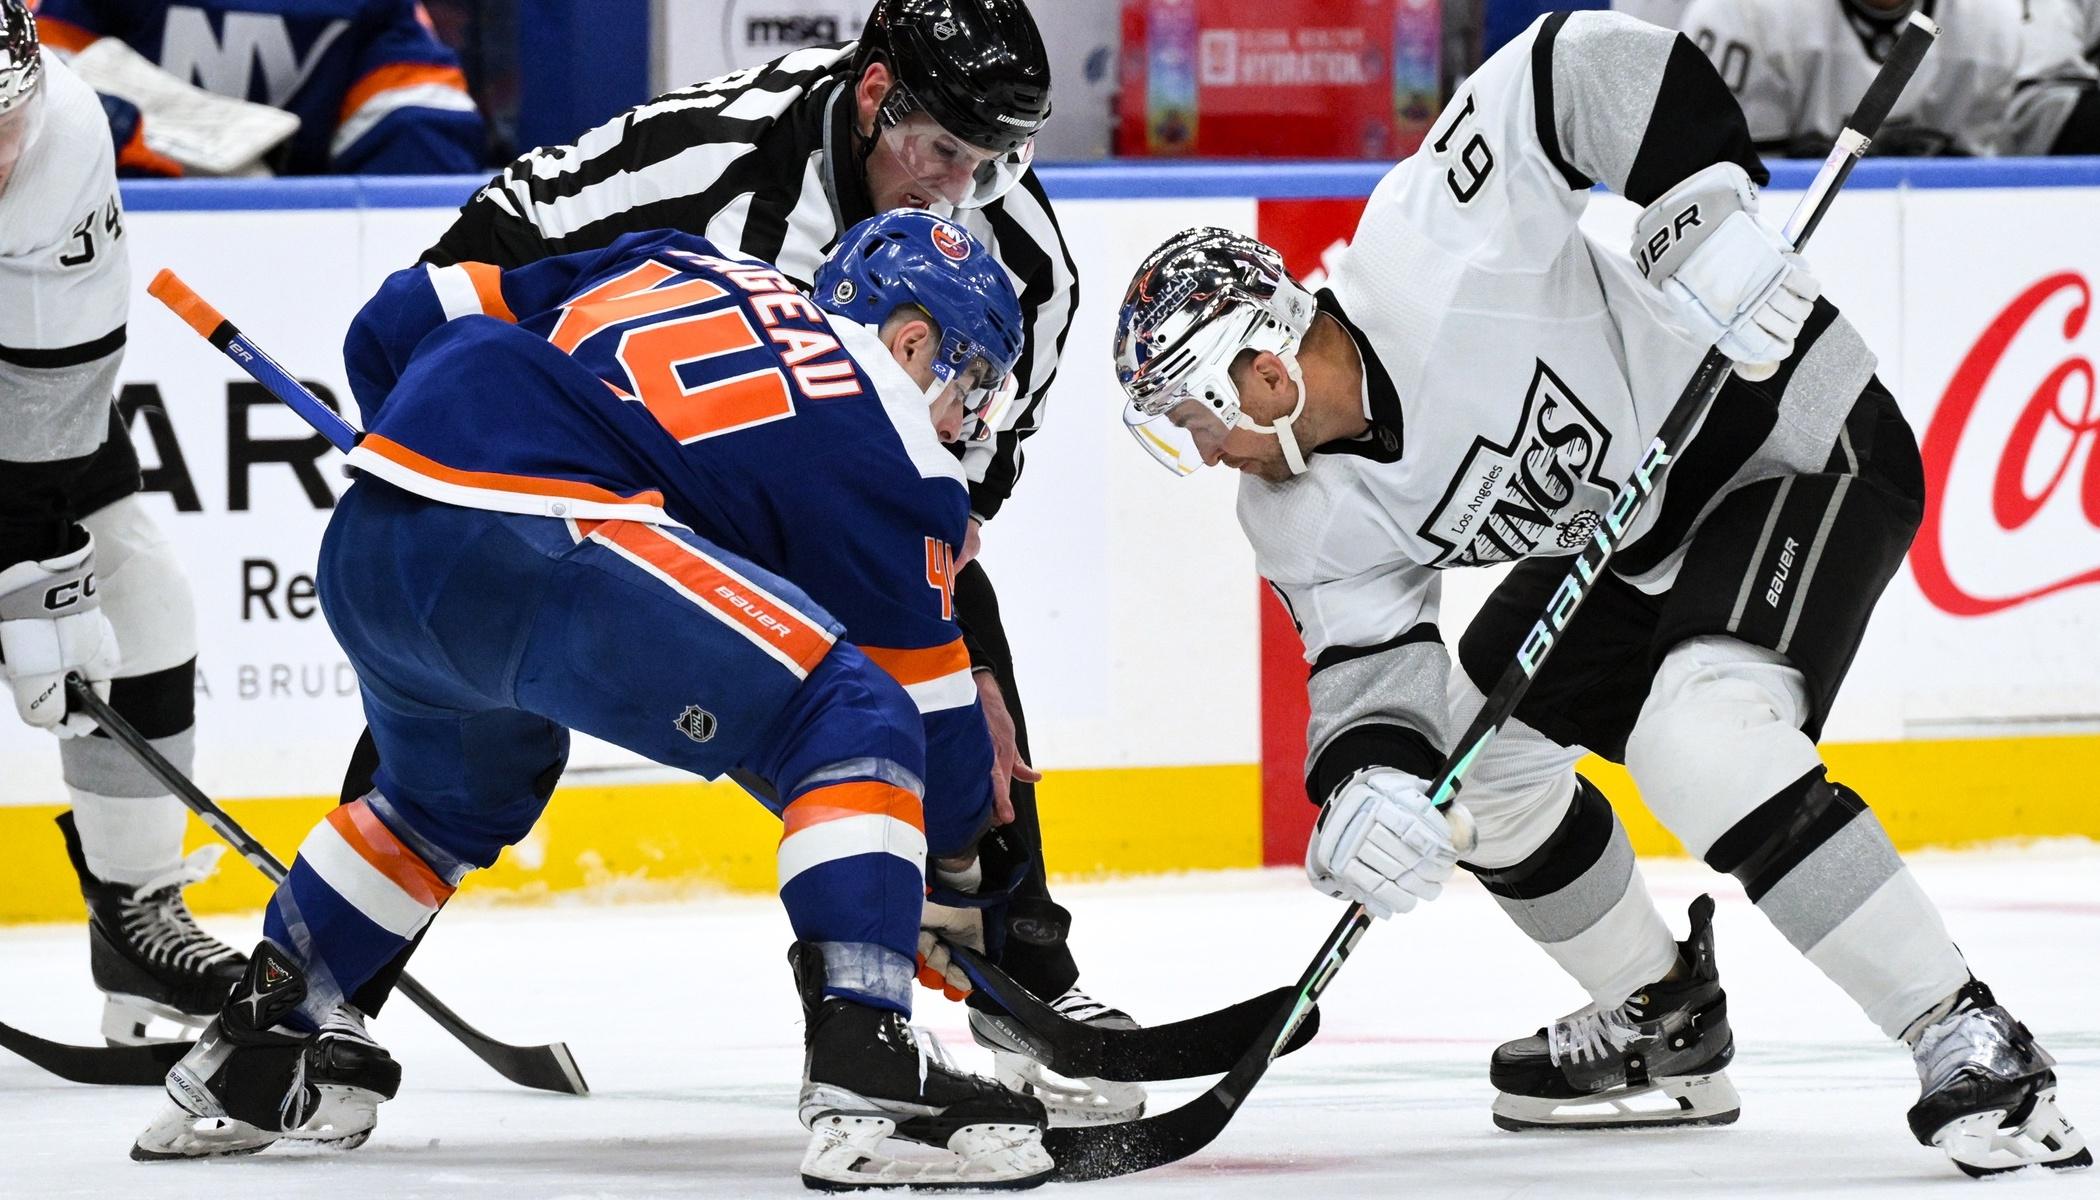 New York Islanders center Jean-Gabriel Pageau (44) faces off against Los Angeles Kings center Trevor Lewis (61) during the first period at UBS Arena. / John Jones-USA TODAY Sports